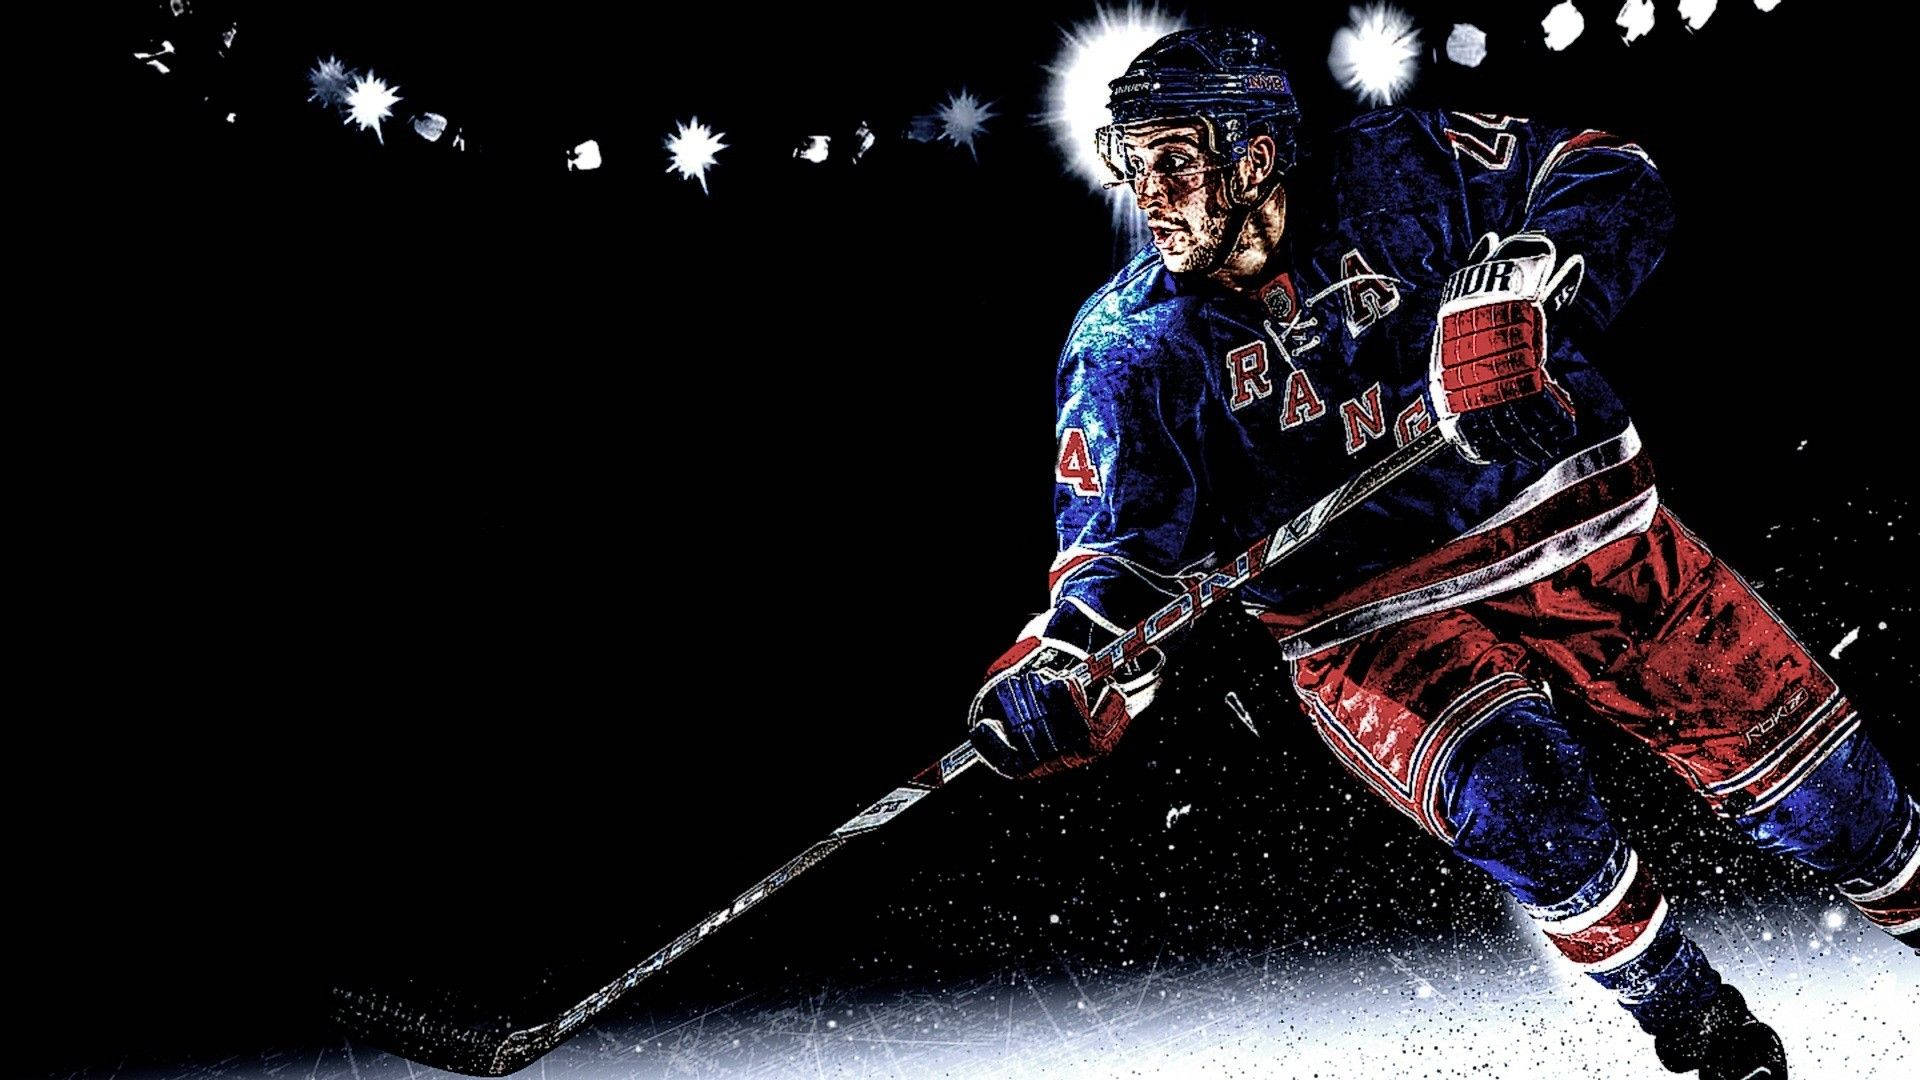 Awesome Johnny Hockey Wallpaper from @hockey.wallpapers : r